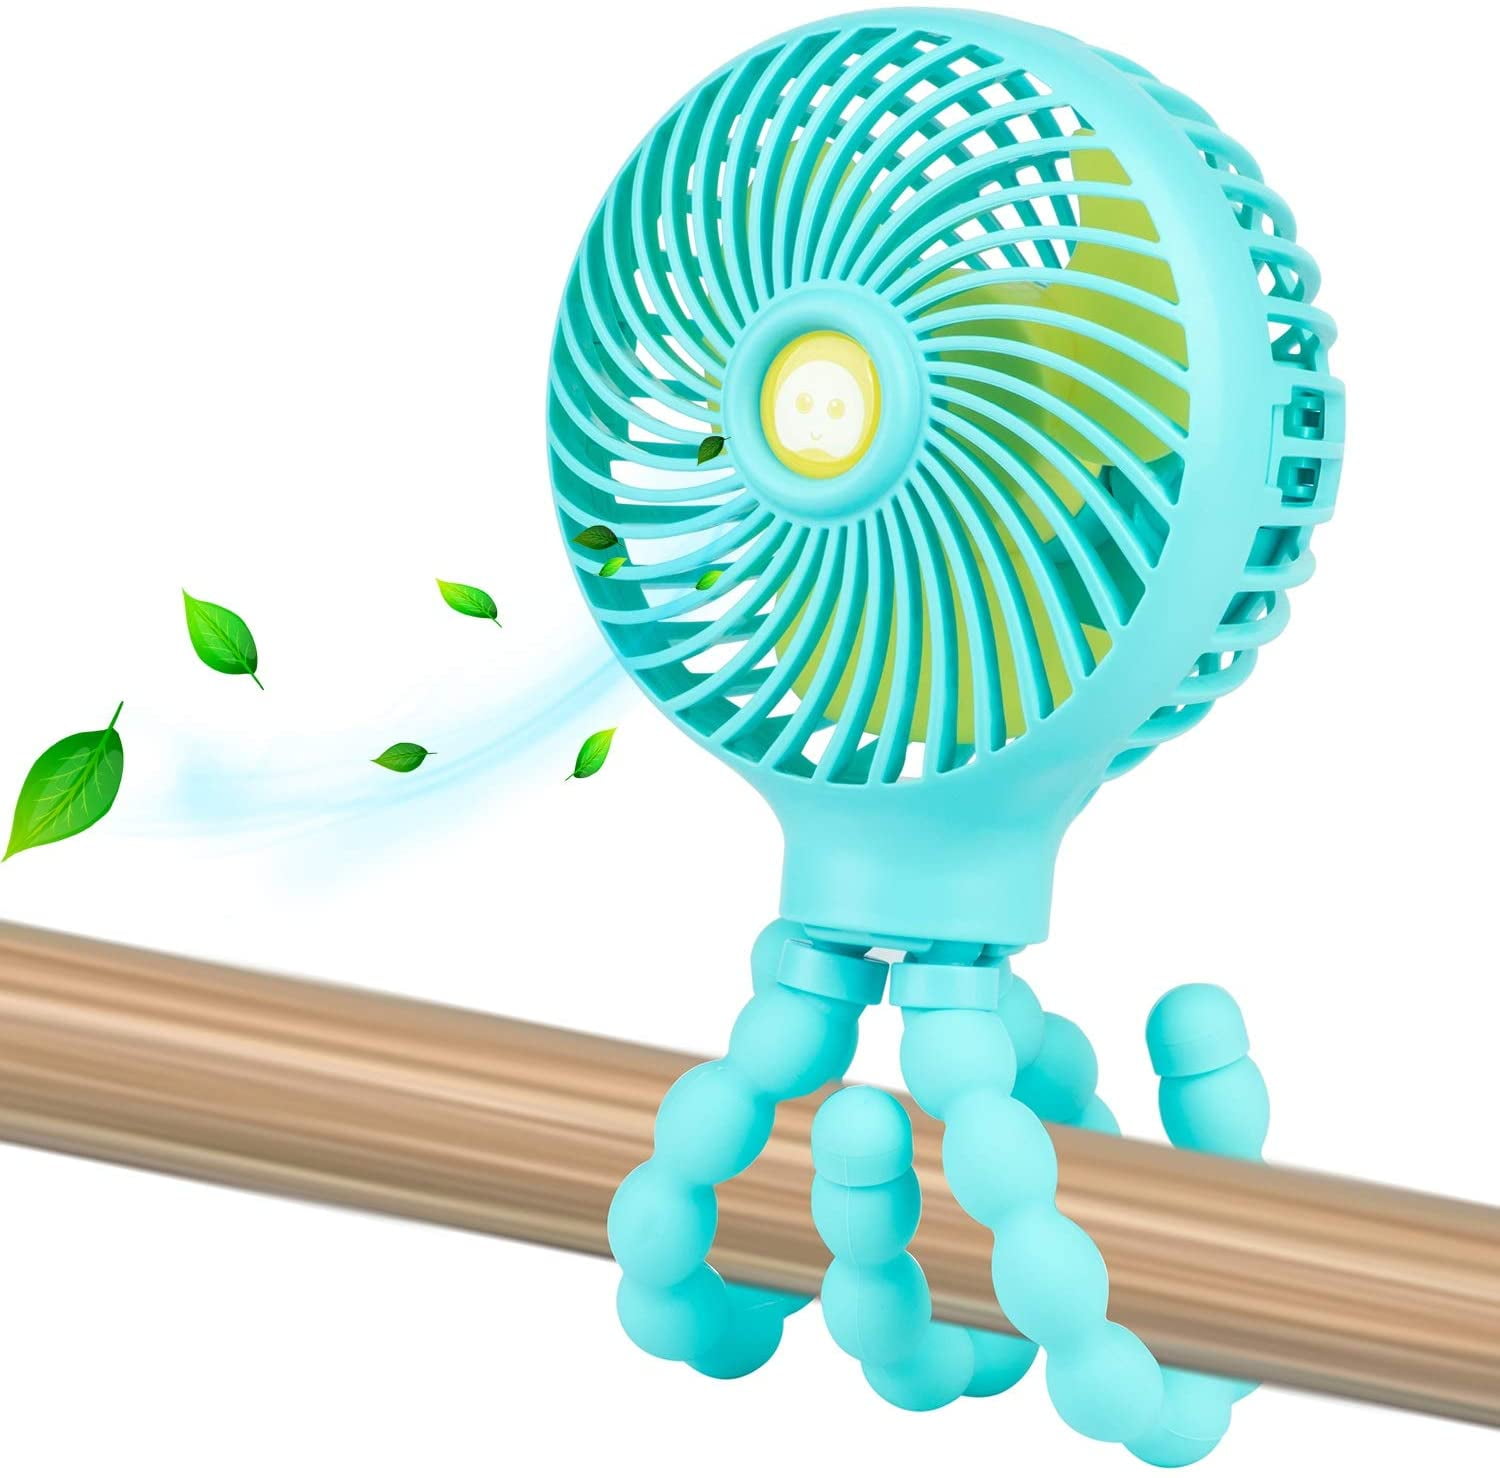 Handheld Personal Portable Fan with Flexible Tripod for Stroller Student Bed Desk Bike Crib Car Rides Mini Baby Stroller Fan USB or Battery Powered Light Blue Safe Quiet and Long Lasting Charge